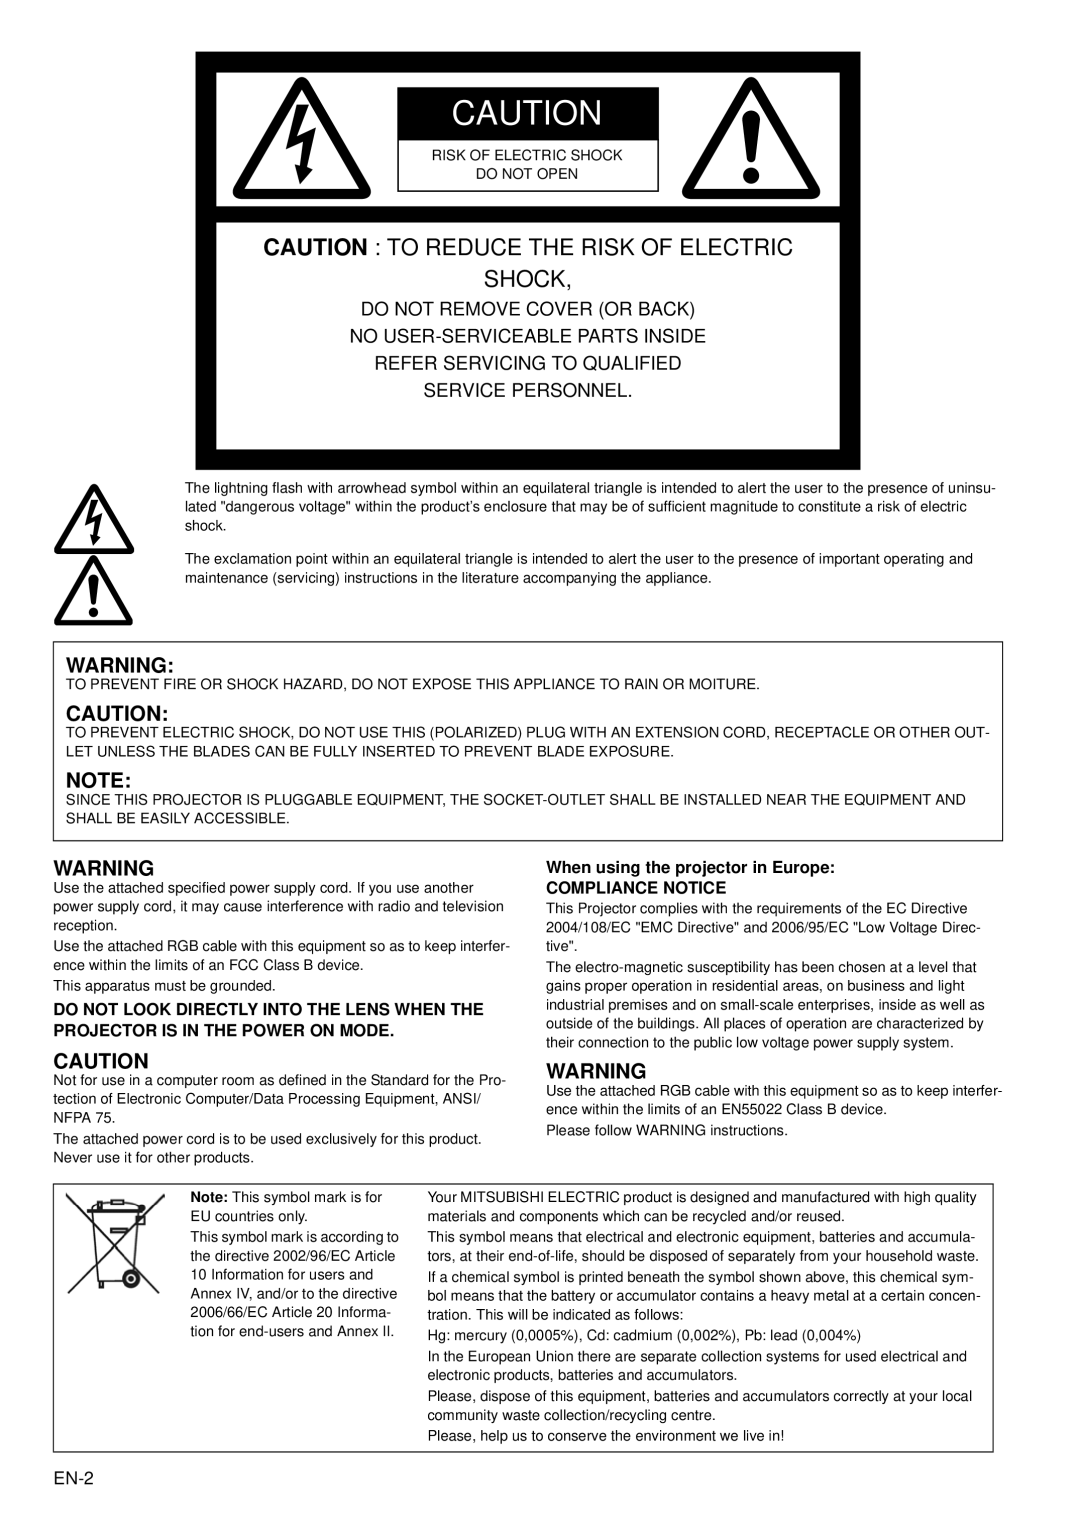 Mitsubishi Electronics XD95U Caution To Reduce The Risk Of Electric Shock, Refer Servicing To Qualified Service Personnel 